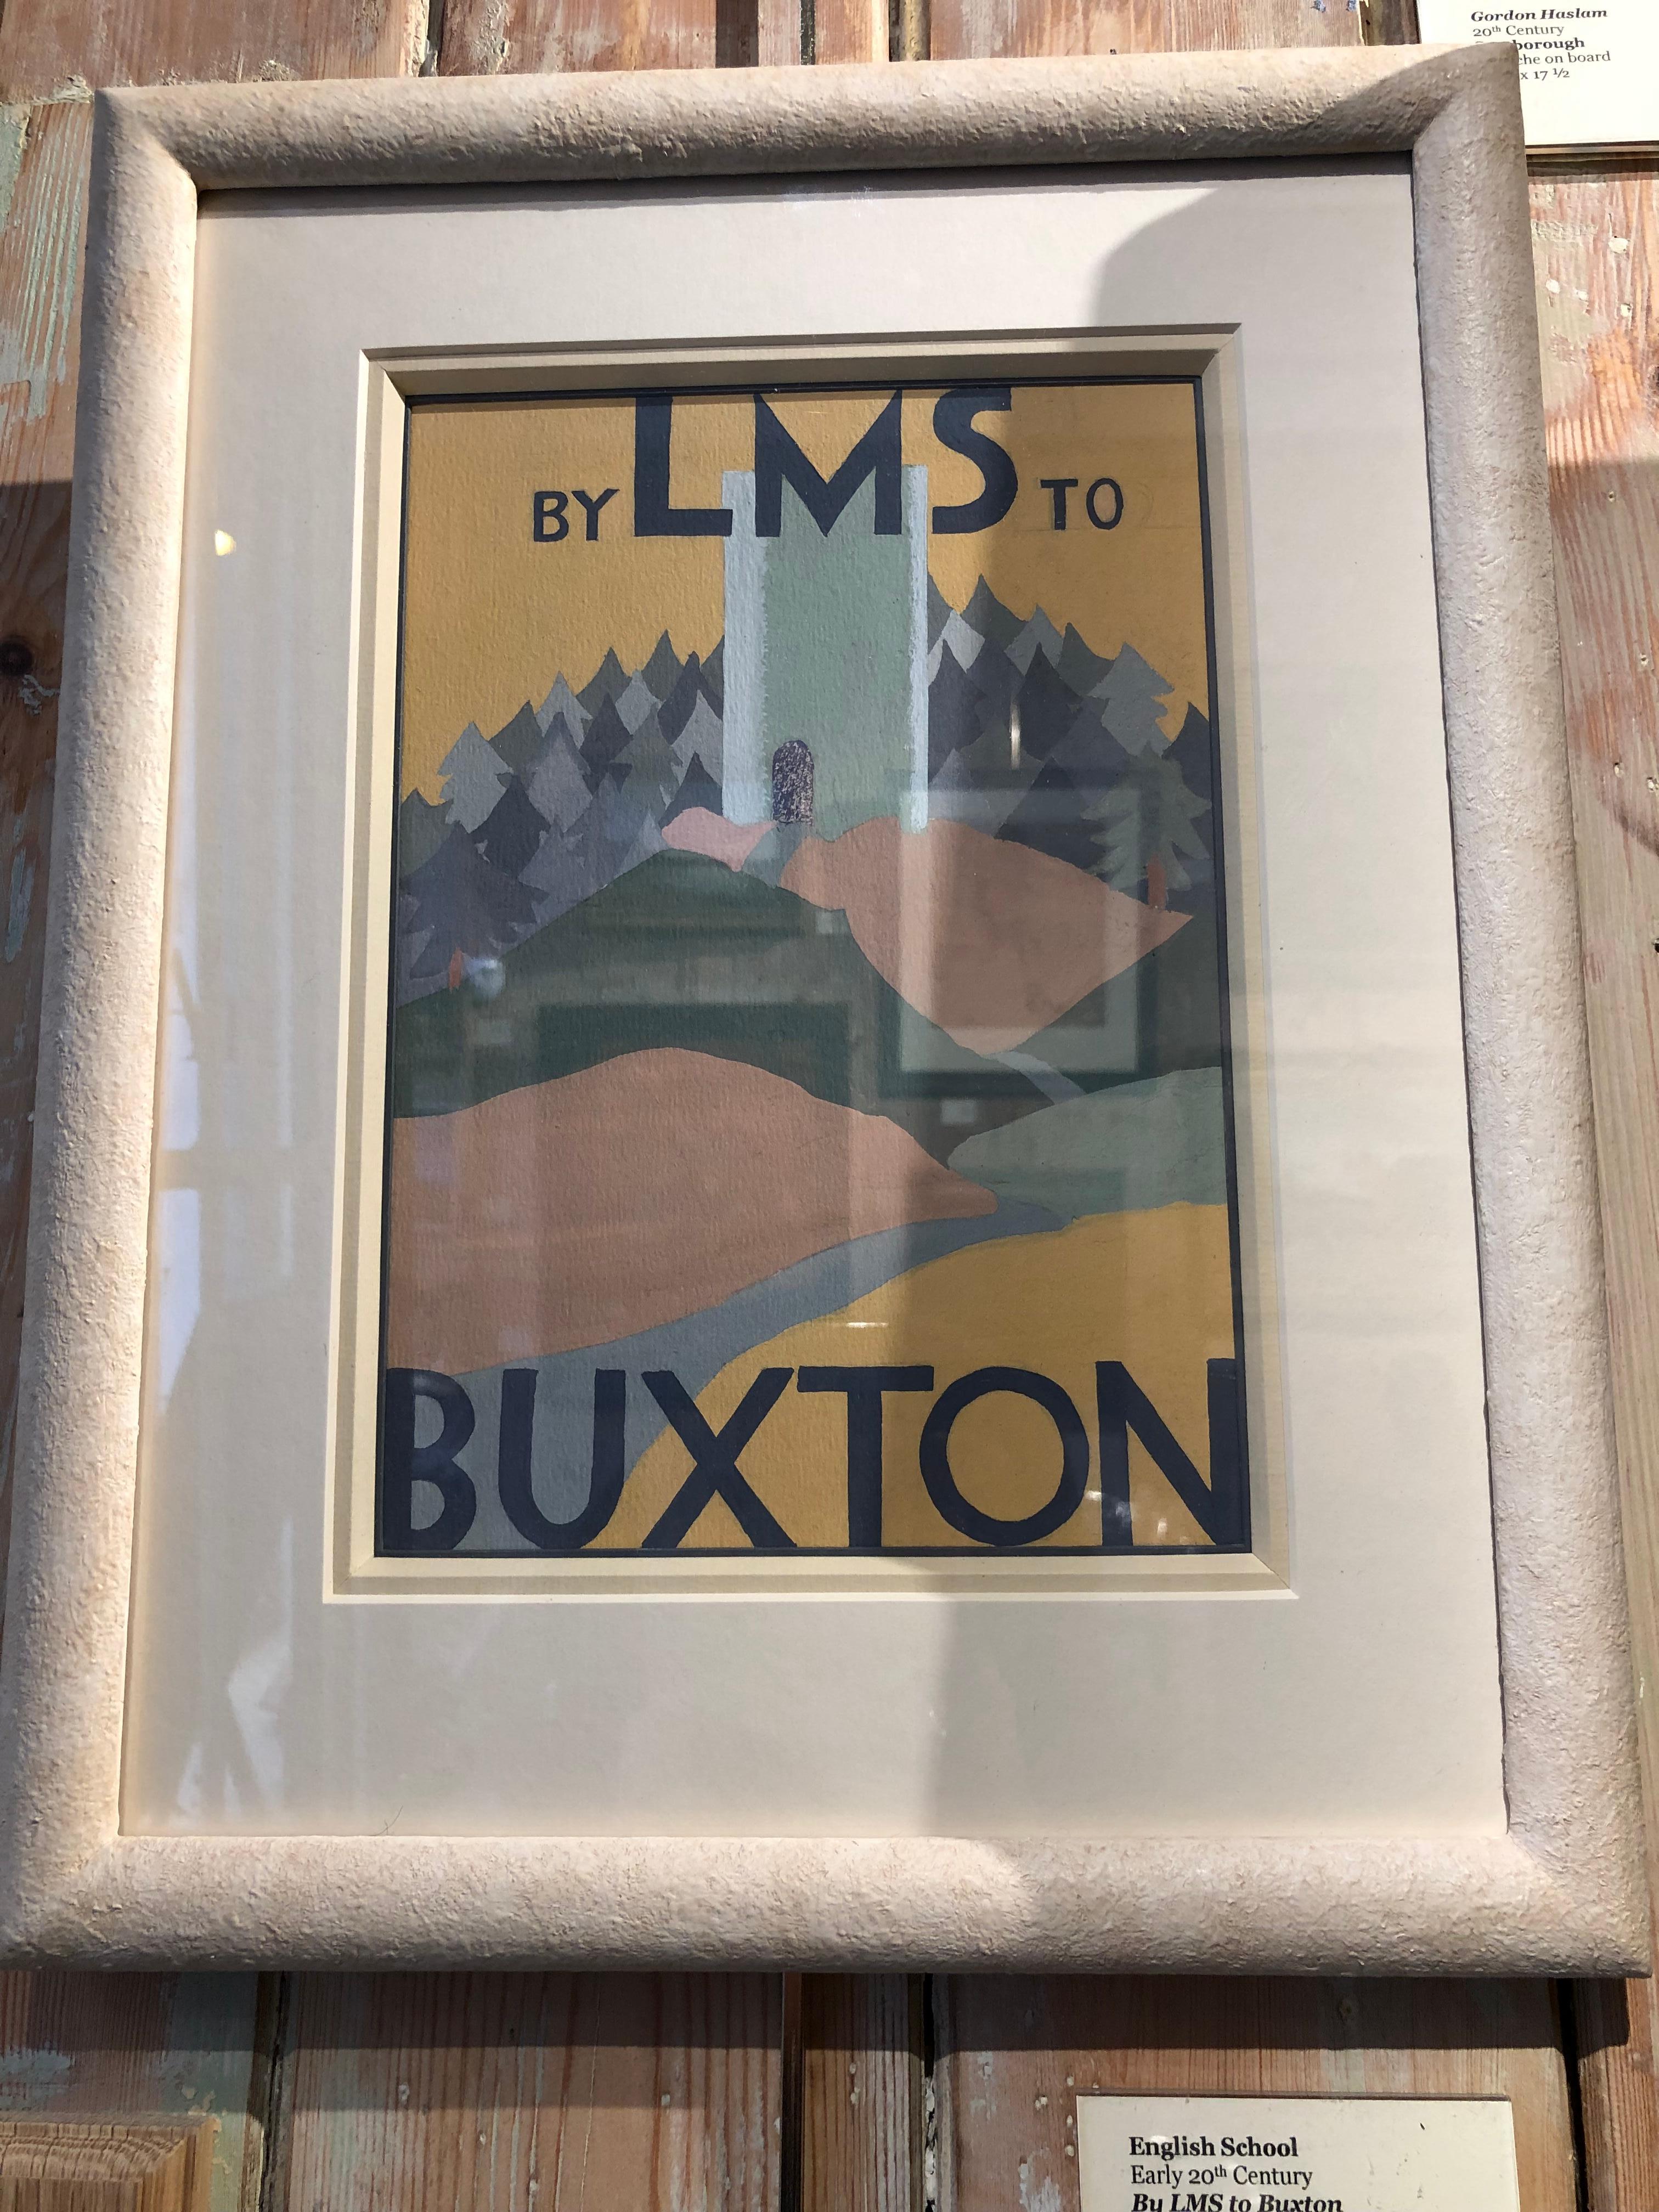 By LMS to Buxton   Original Railway Travel Poster Artwork Gouache 20th Century - Brown Landscape Art by Unknown